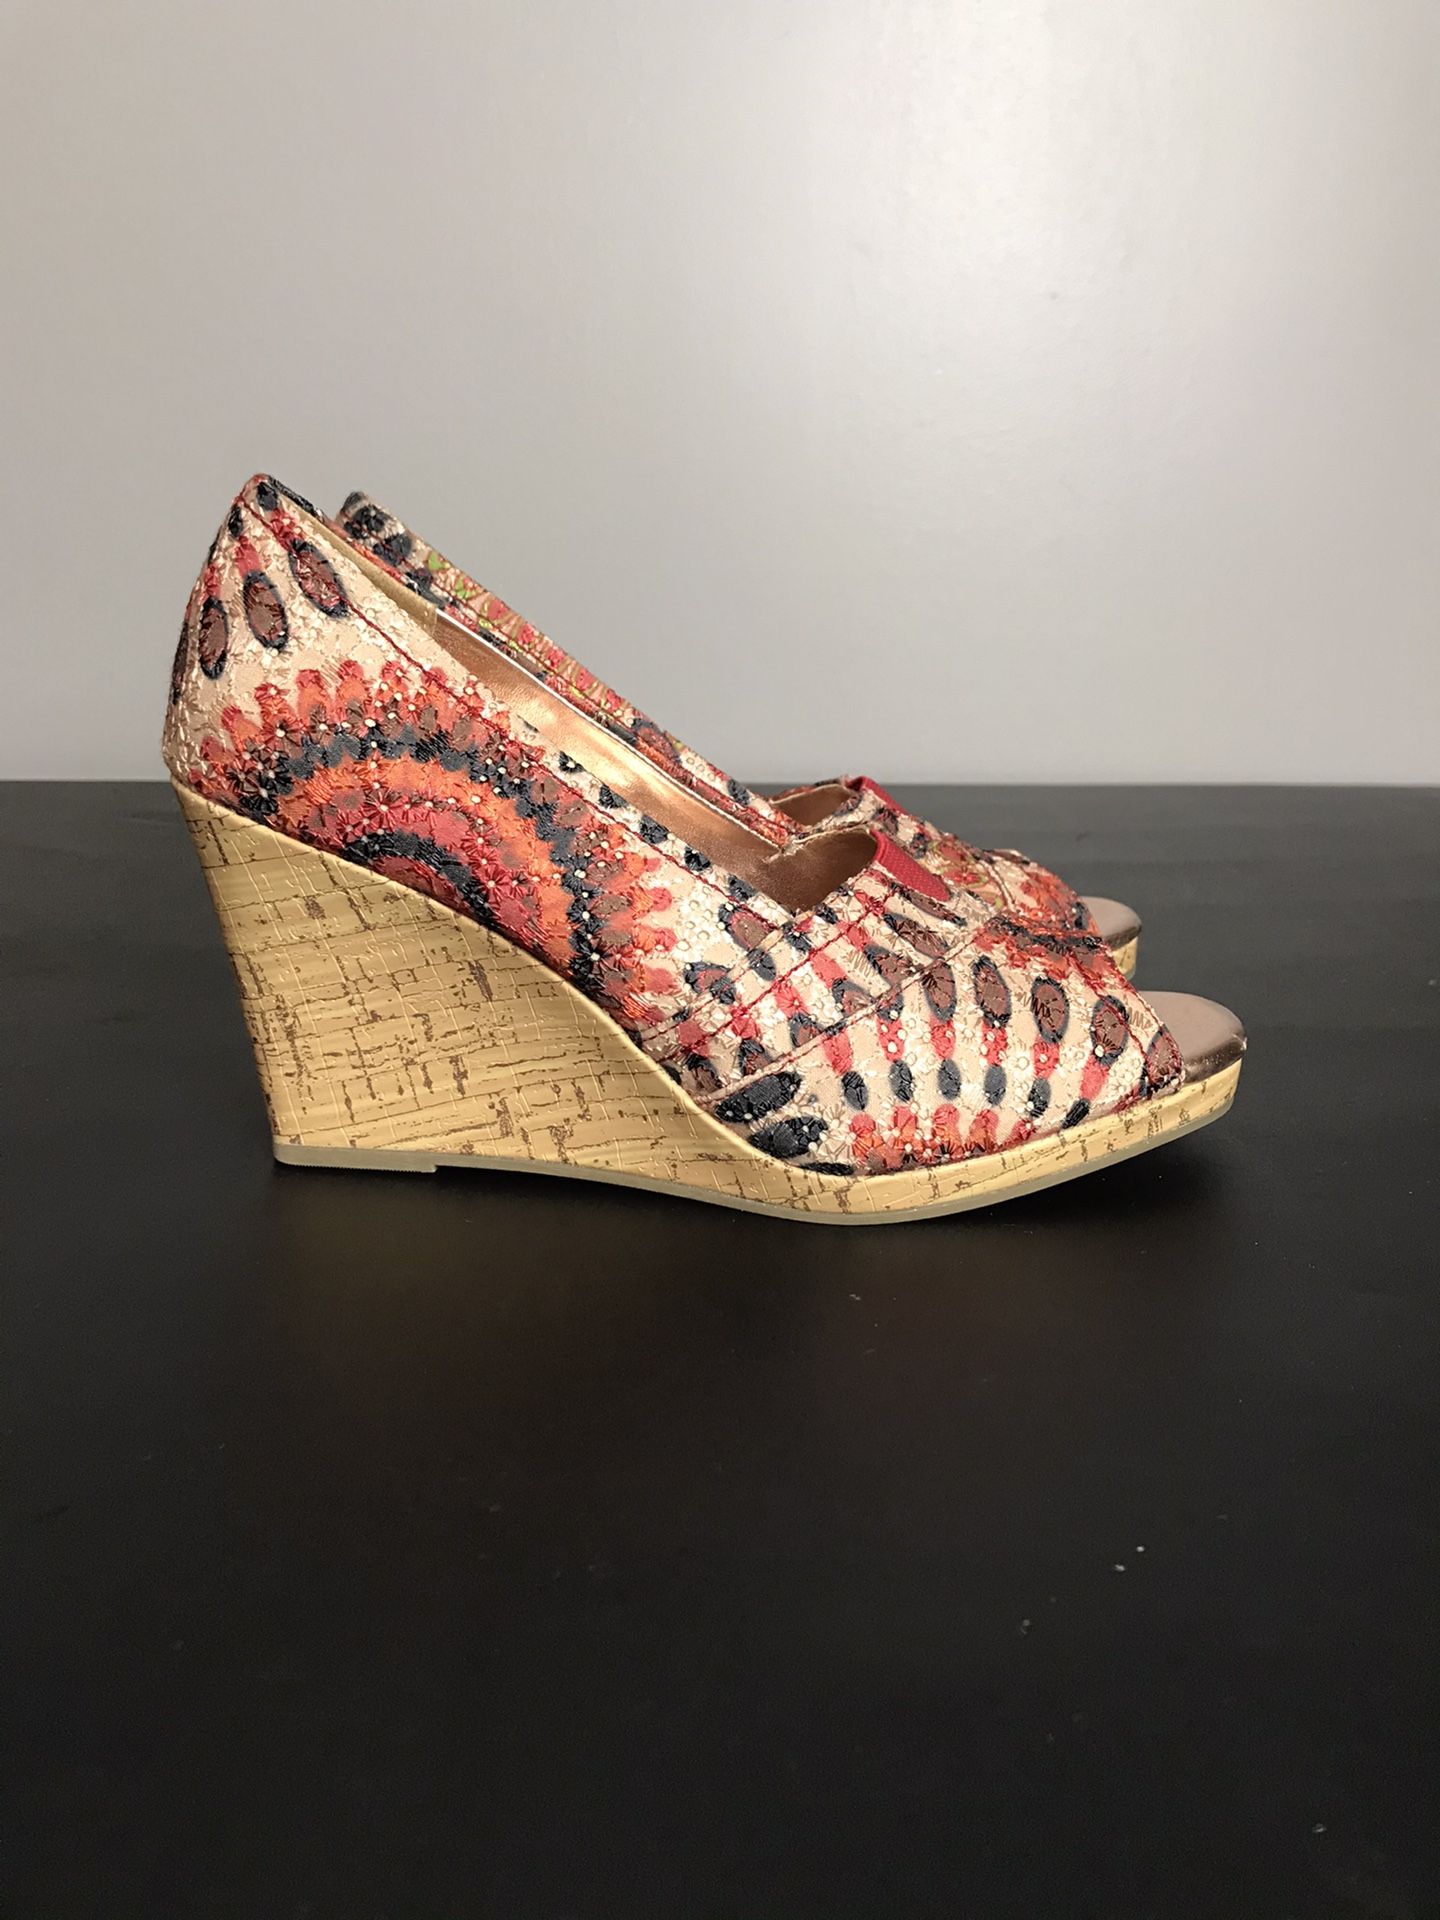 Women's Faded Glory Wedge Sandal New Unworn Multi Color Fabric Fashion New without box Size 8